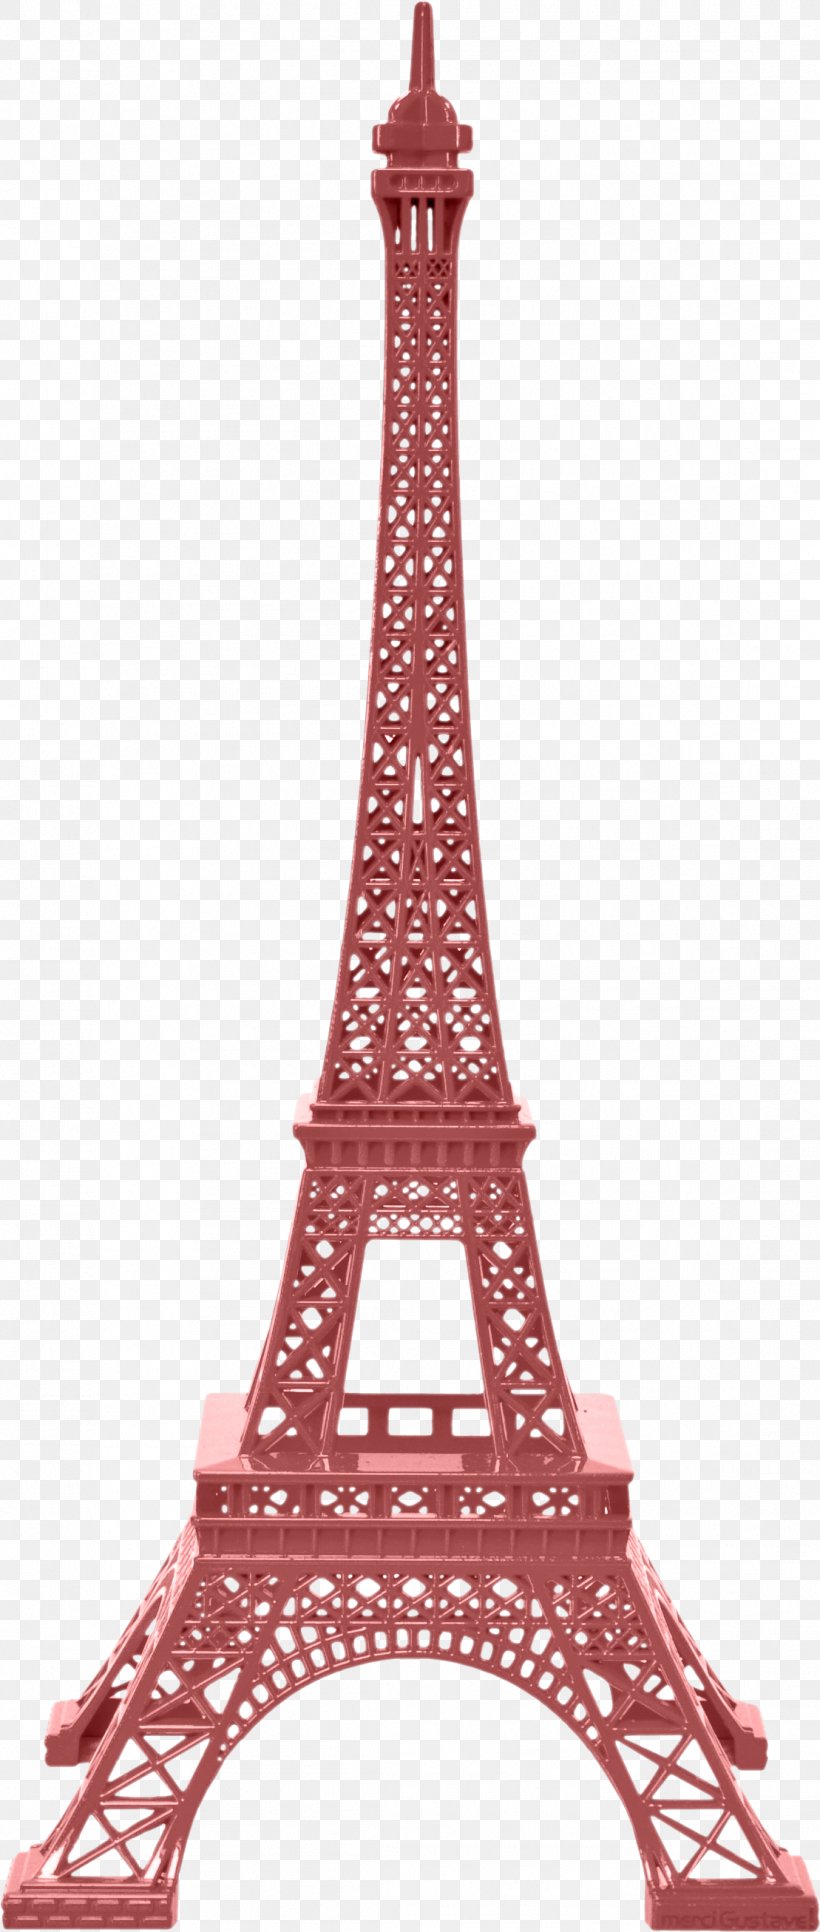 Eiffel Tower Statue Of Liberty Black And White, PNG, 1109x2613px, Eiffel Tower, Black, Black And White, Color, Landmark Download Free